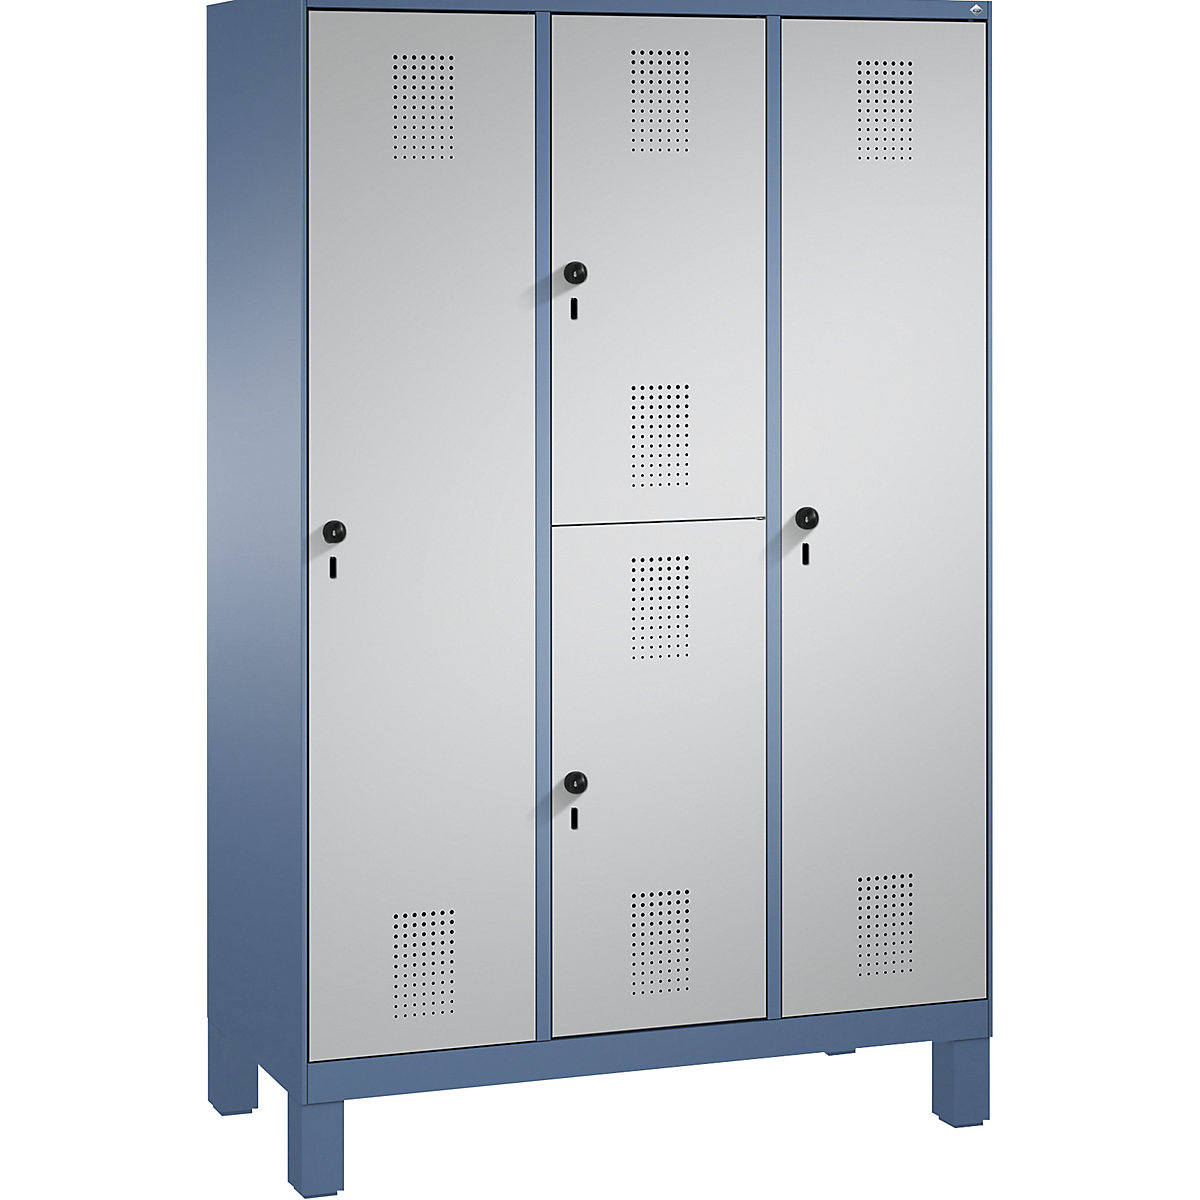 EVOLO combination cupboard, single and double tier – C+P, 3 compartments, 4 doors, compartment width 400 mm, with feet, distant blue / white aluminium